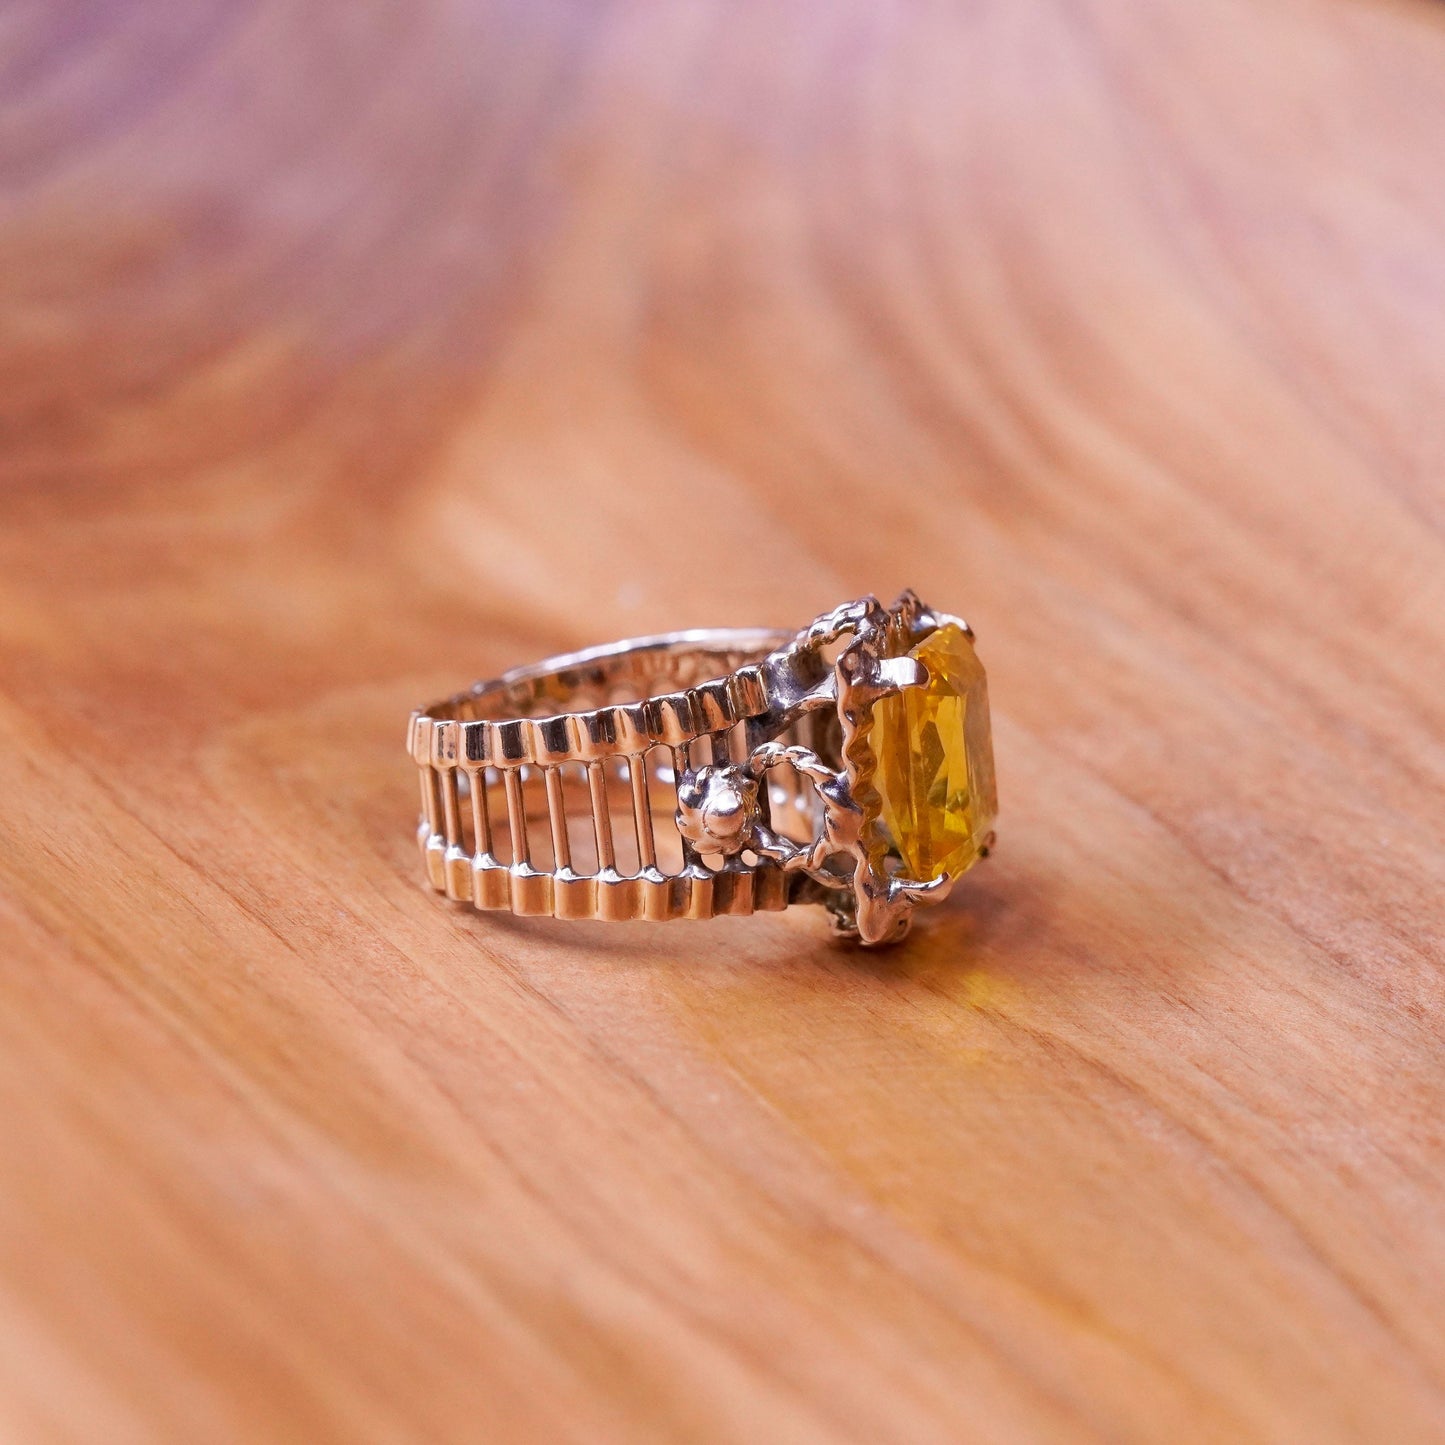 Size 7.75, 8.8g, vintage 785 18K yellow gold handmade ribbed ring with citrine